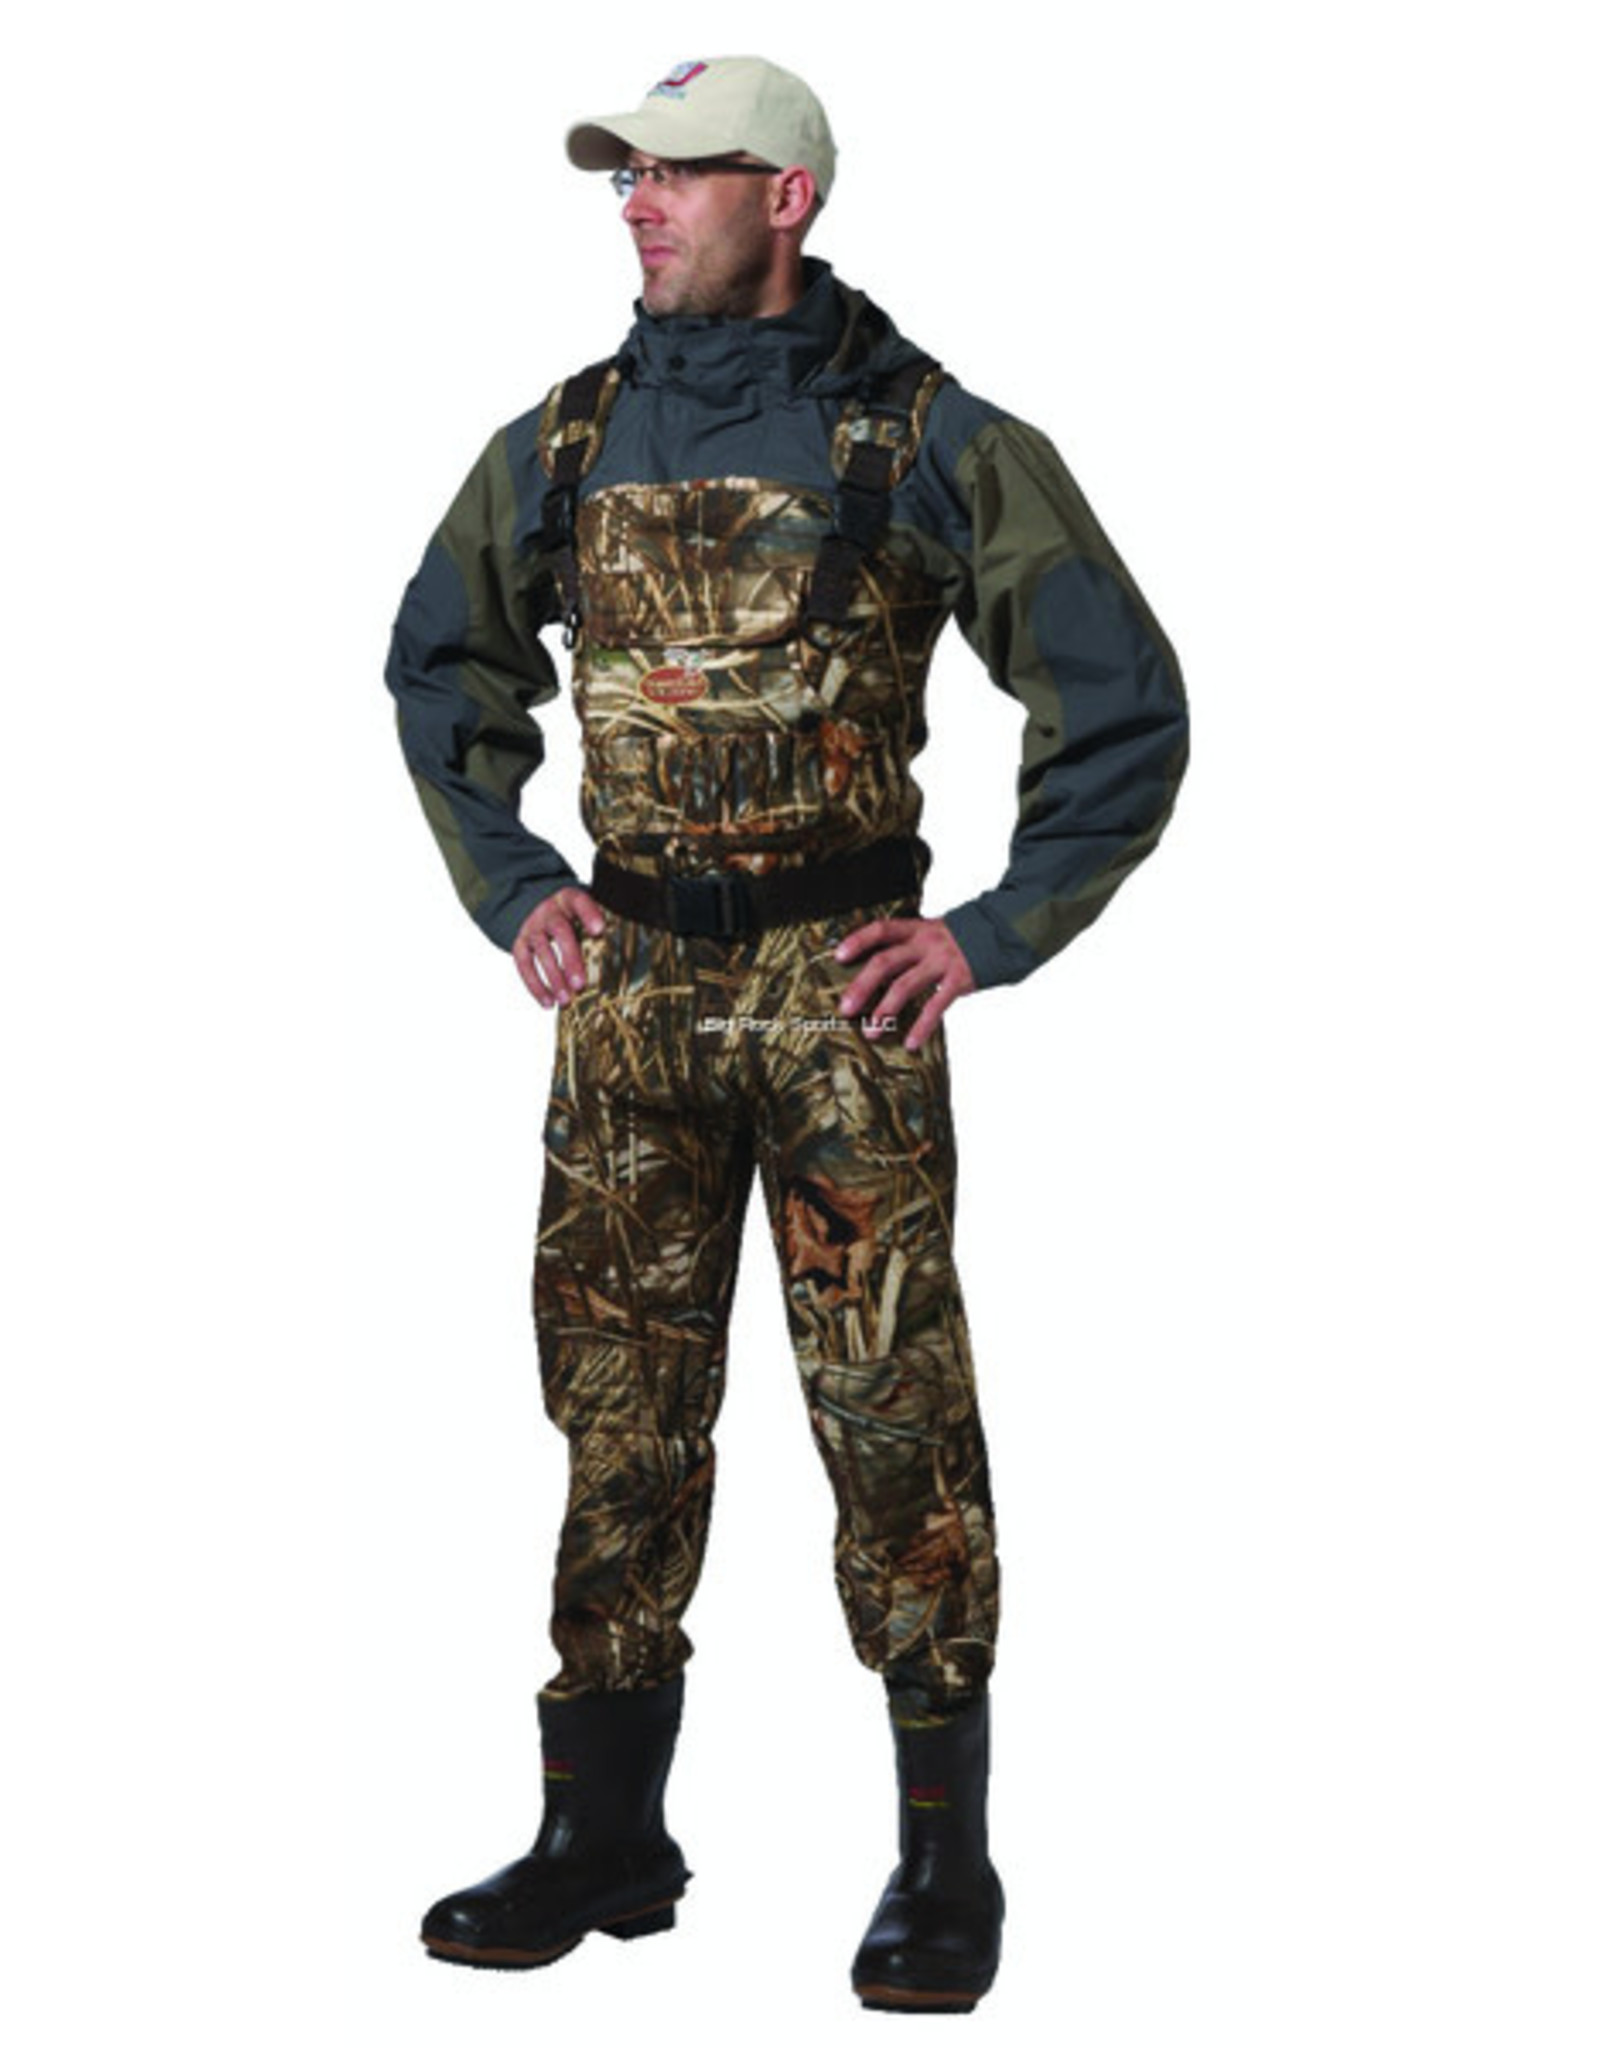 Caddis Men's Size 10 STOUT - 600gr - Caddis Wading Systems 3.5mm Max5 Neoprene Bootfoot Chest Waders